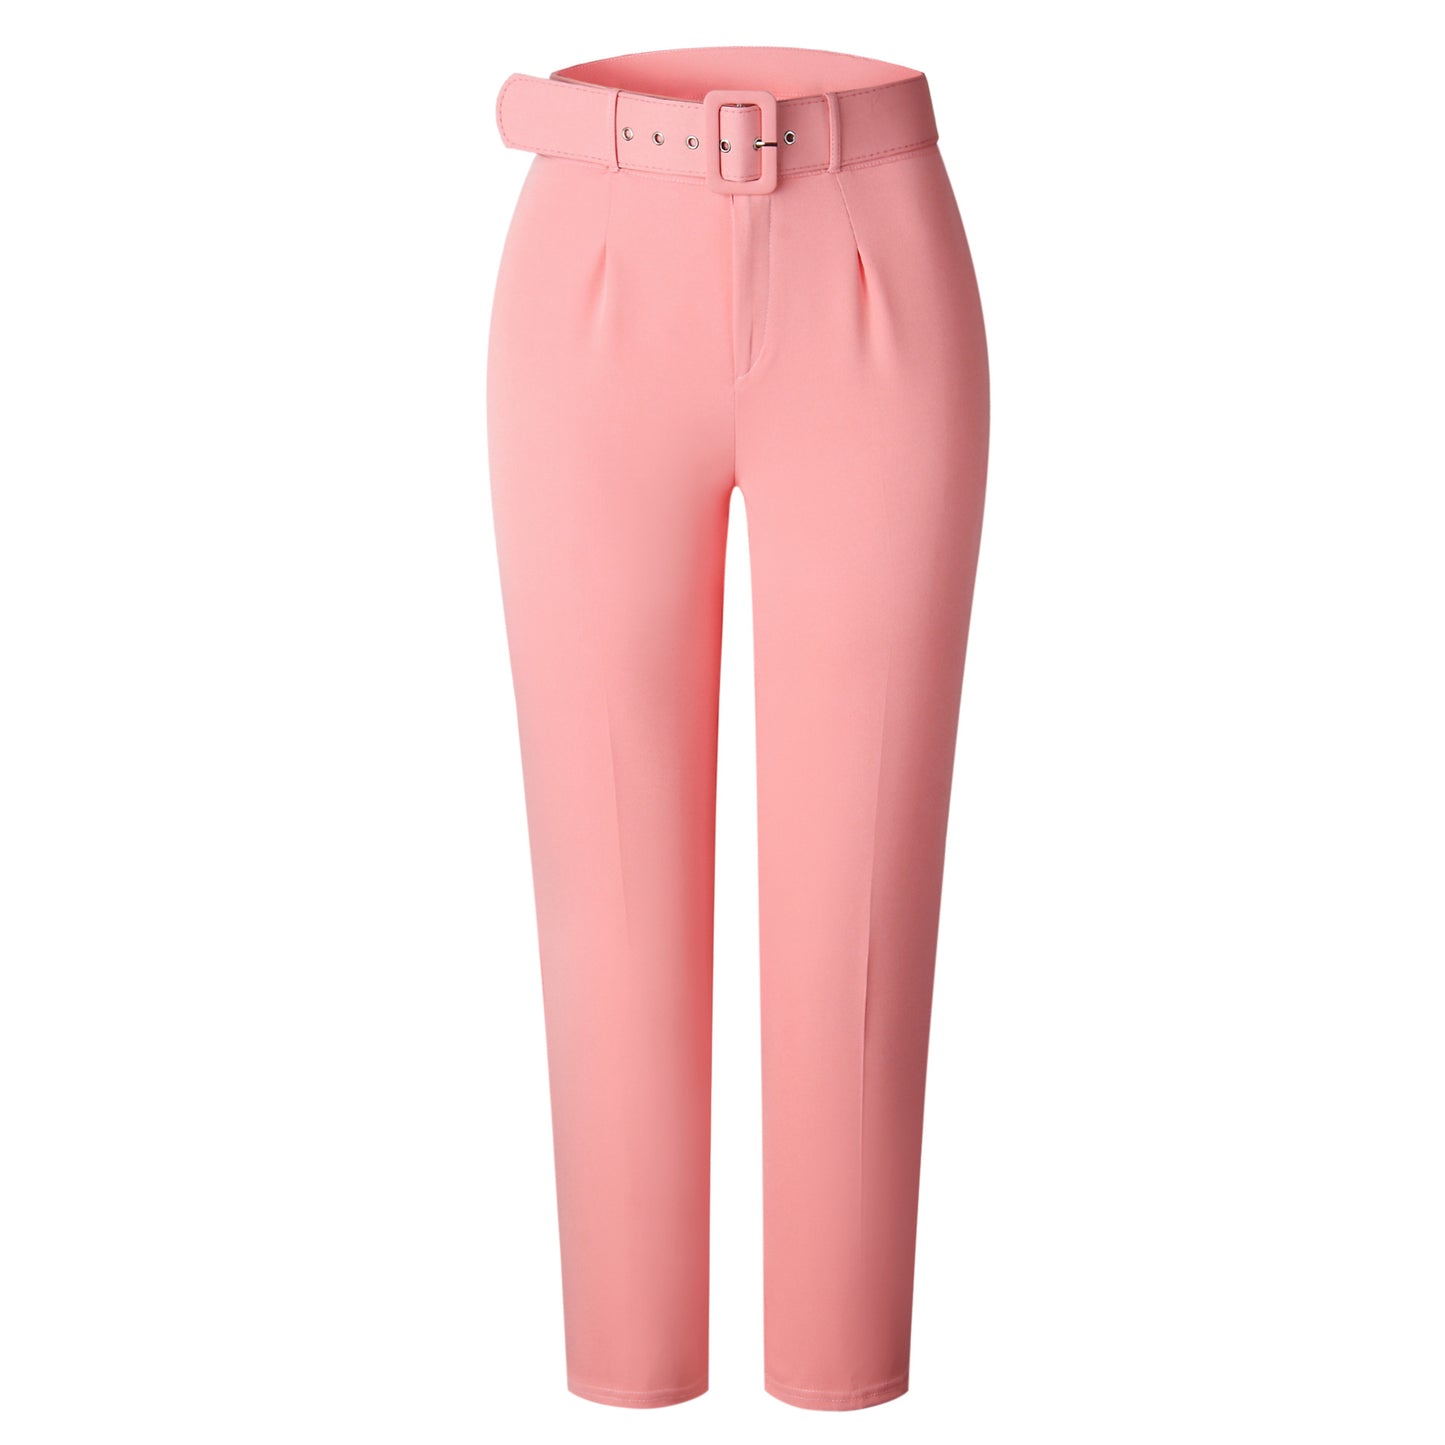 BamBam Women's Spring And Summer High Waist Casual Pants Slim Fit Set Career Women's Trousers Autumn Professional Pants - BamBam